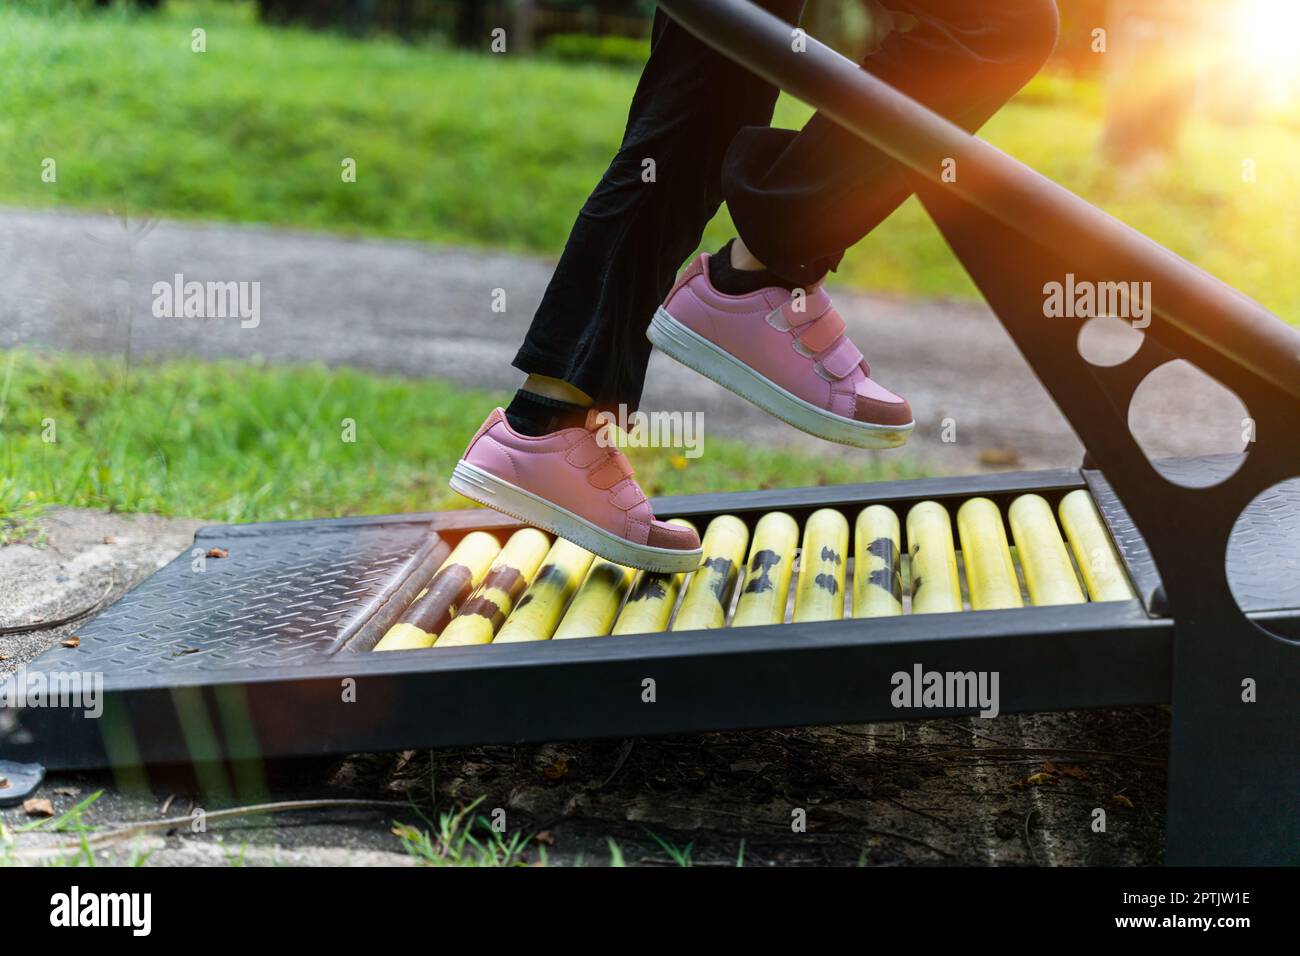 Close up of Child girl running on a treadmill for exercise at the playground in park outdoor. Fitness and healthy lifestyle concept Stock Photo